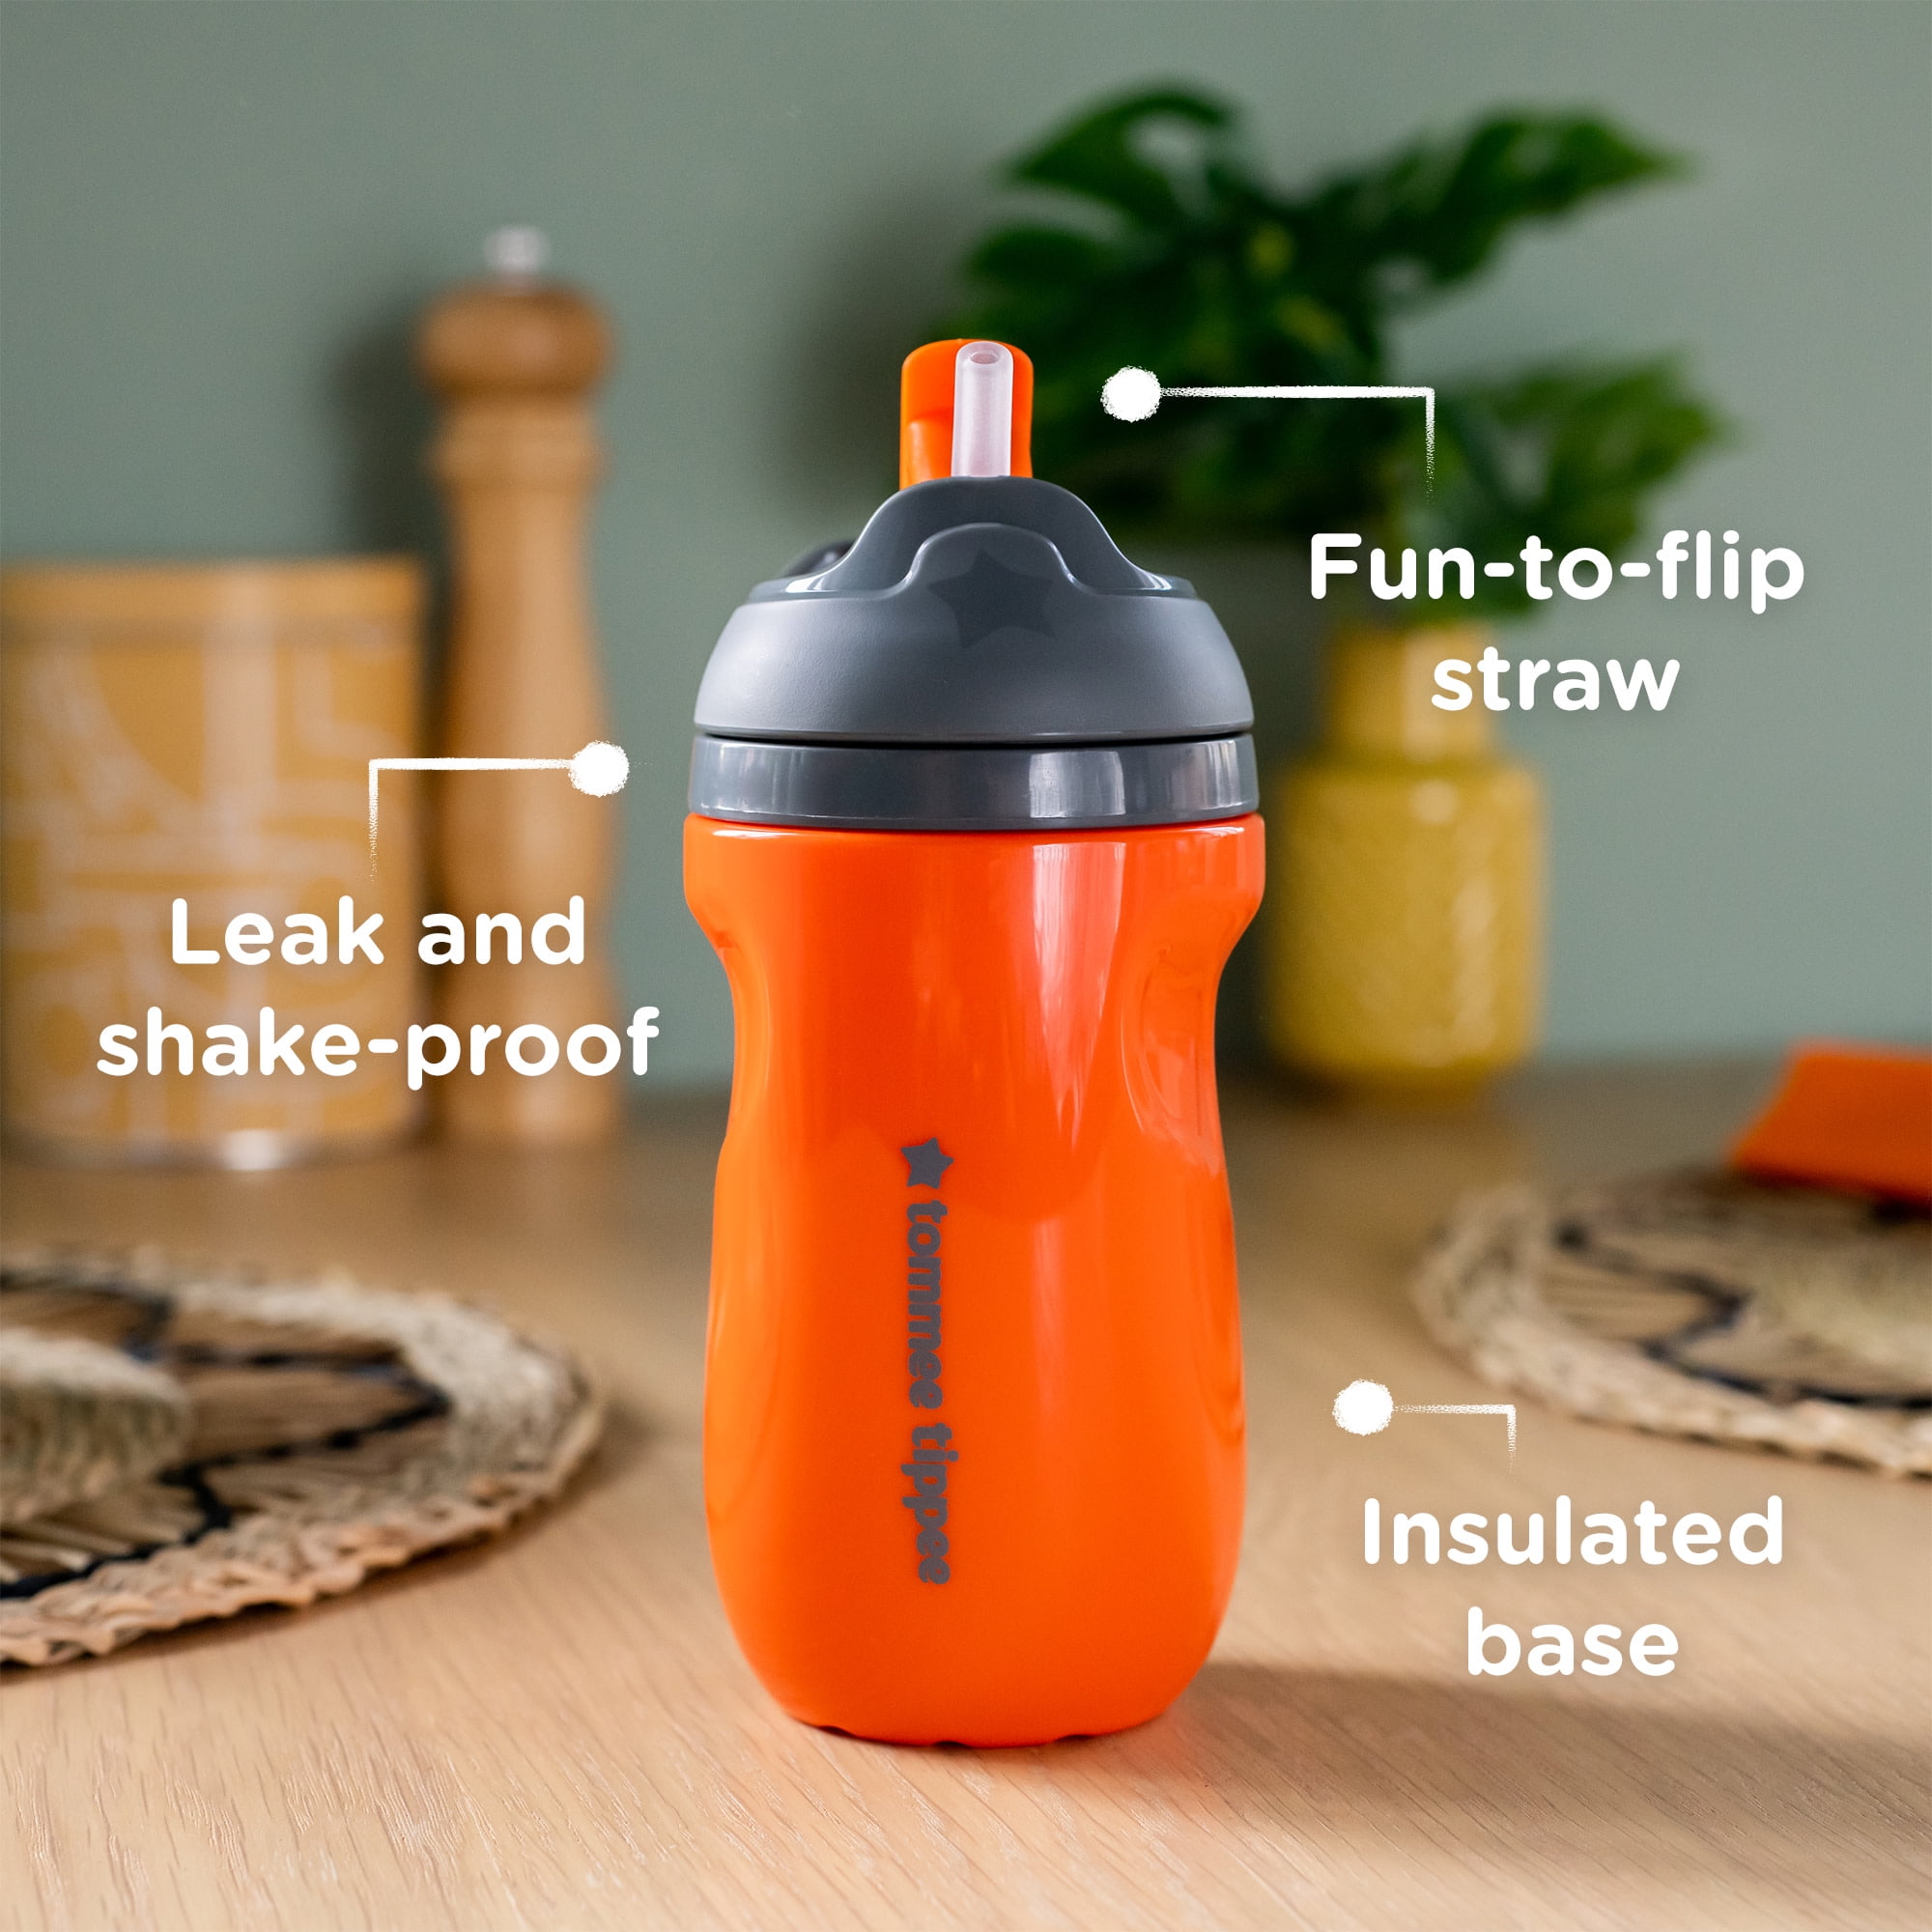 Tommee Tippee Tumbler Straw, Insulated, 9 Fluid Ounce, 12+ Months